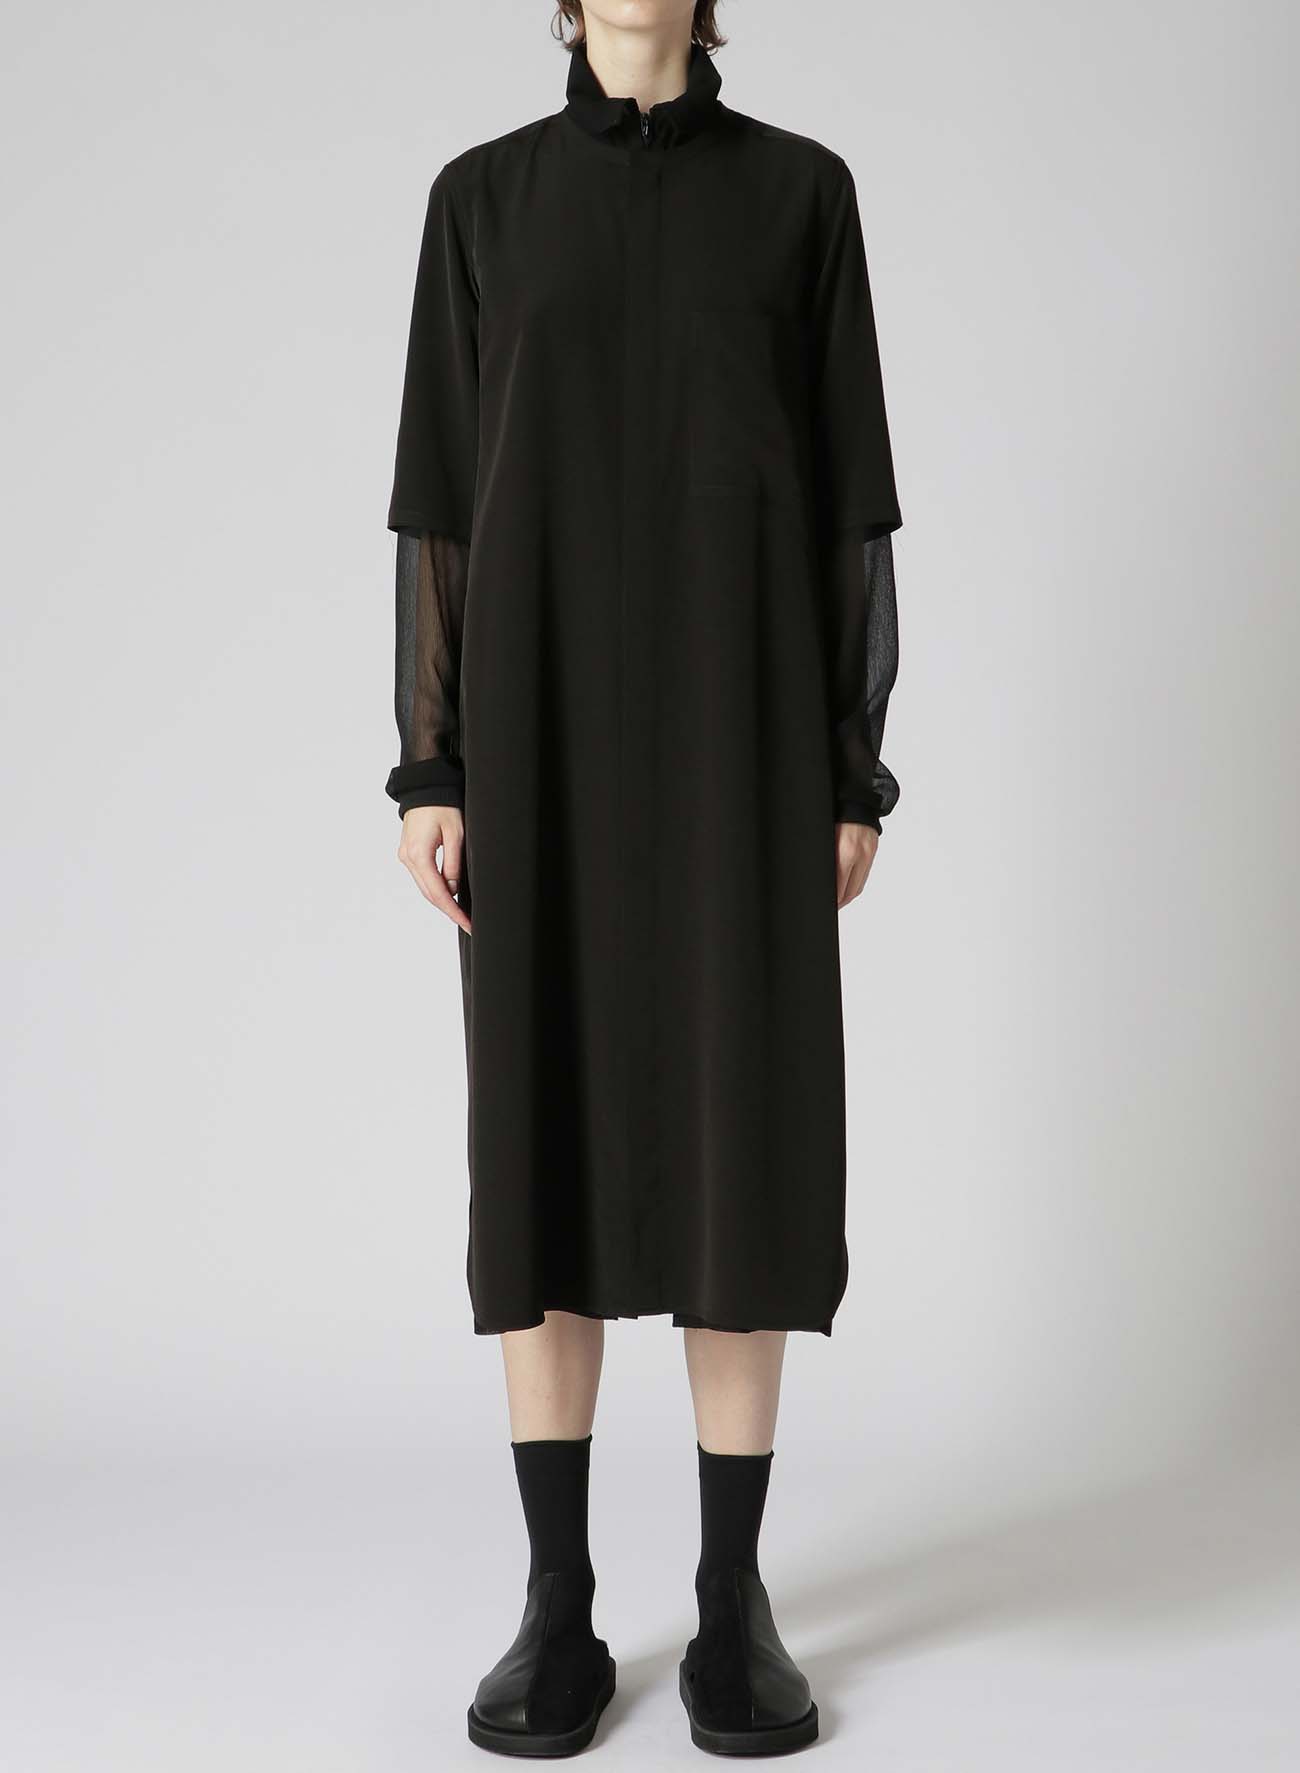 TRIACETATE POLYESTER DOUBLE LAYERED LONG SHIRT